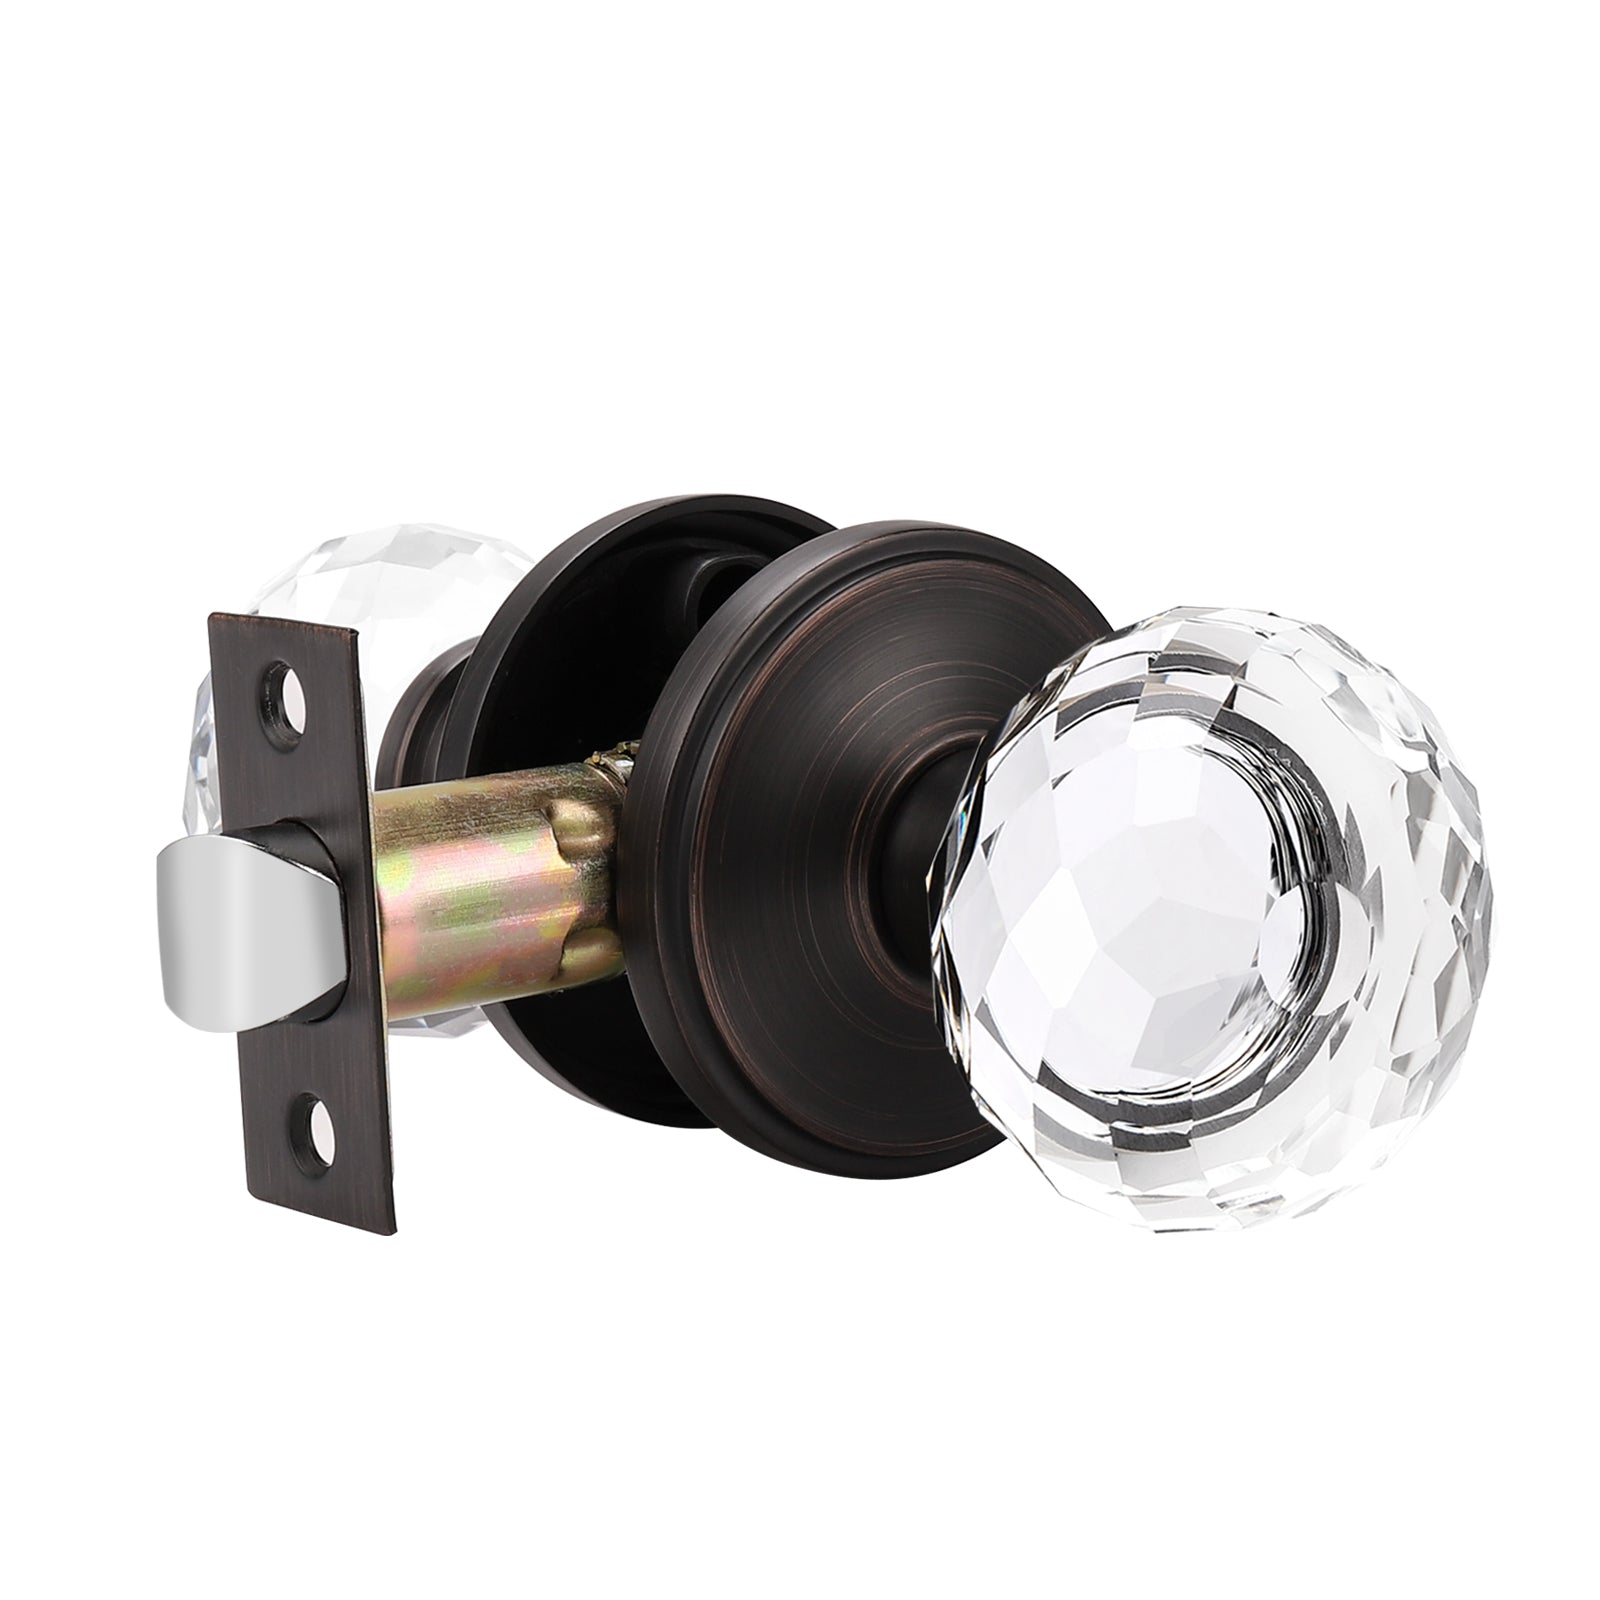 Diamond Crystal Glass Door Knobs with Oil Rubbed Bronzze Round Rosette, Privacy/Passage/Dummy Door Lock DLC10ORB